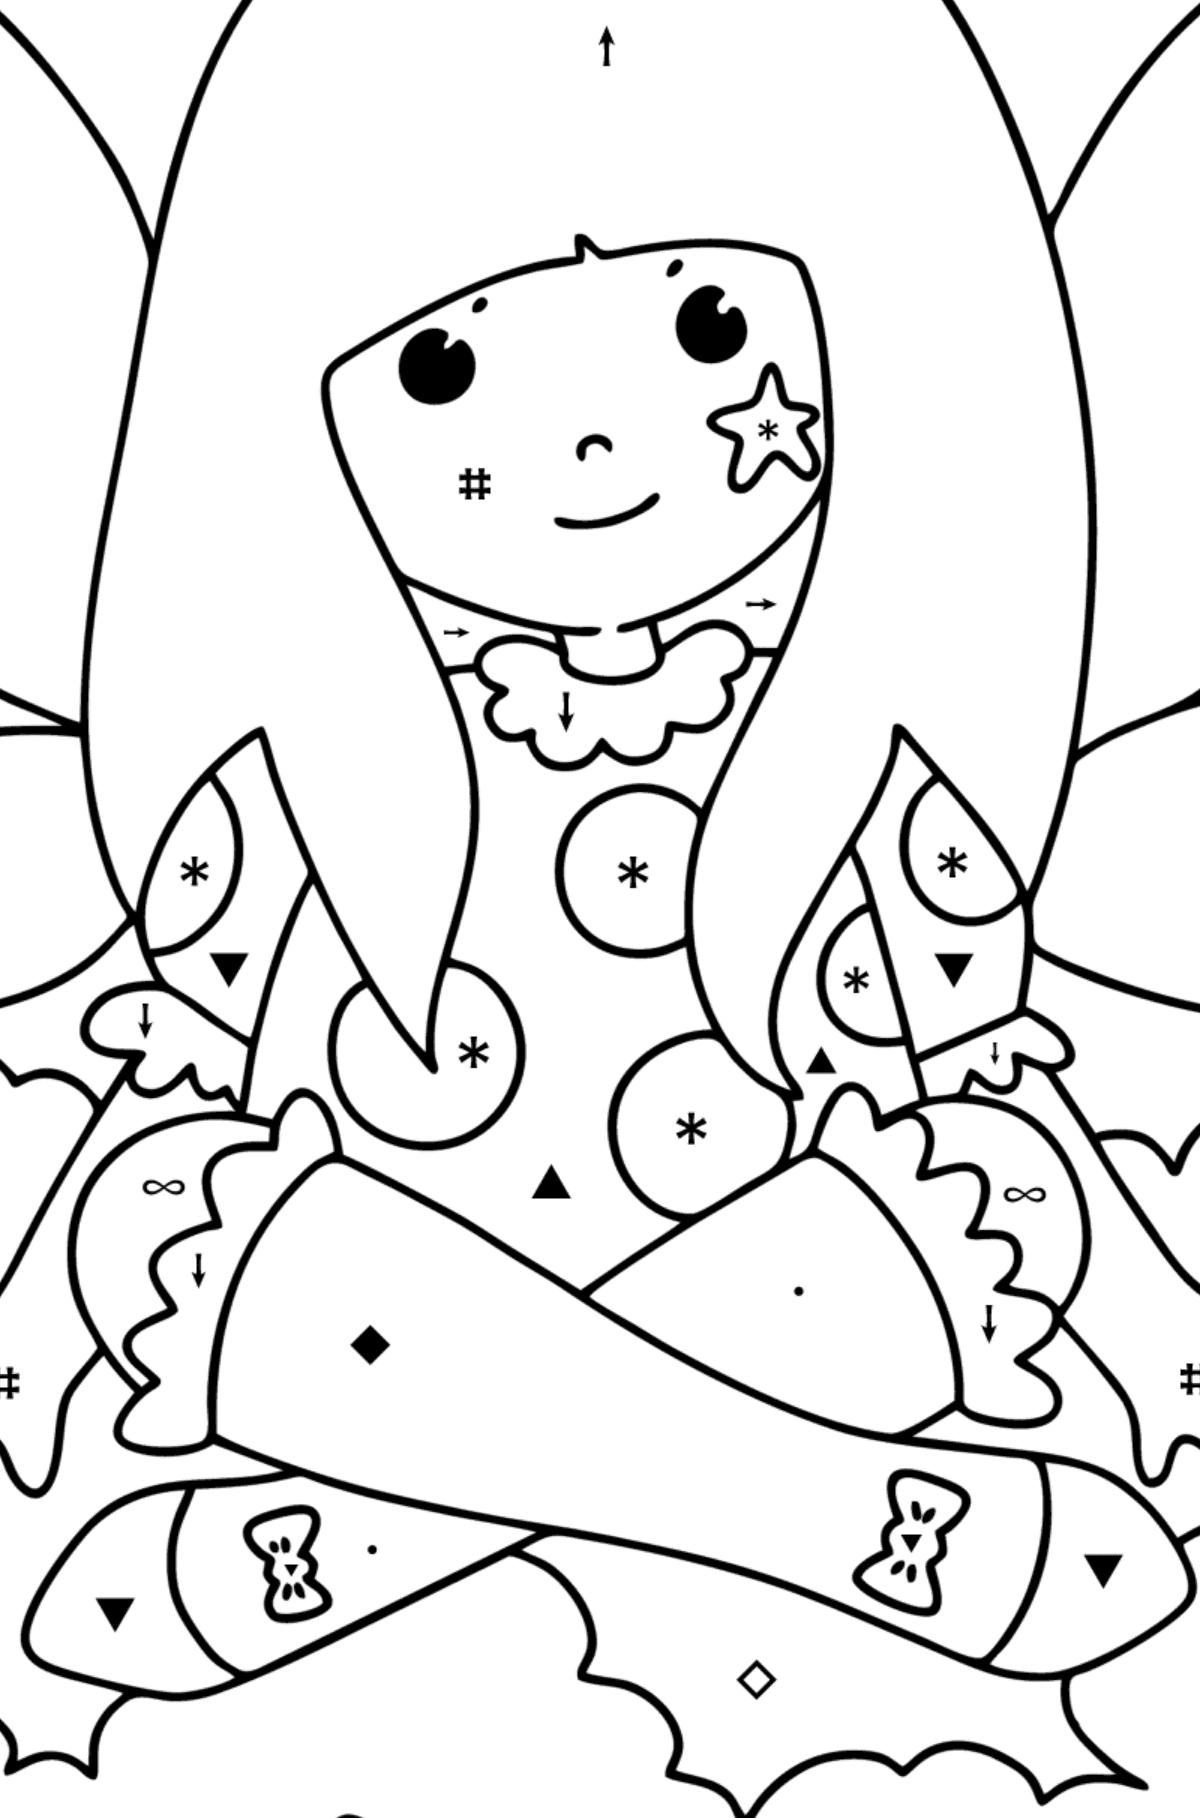 Cartoon fairy coloring page - Coloring by Symbols for Kids